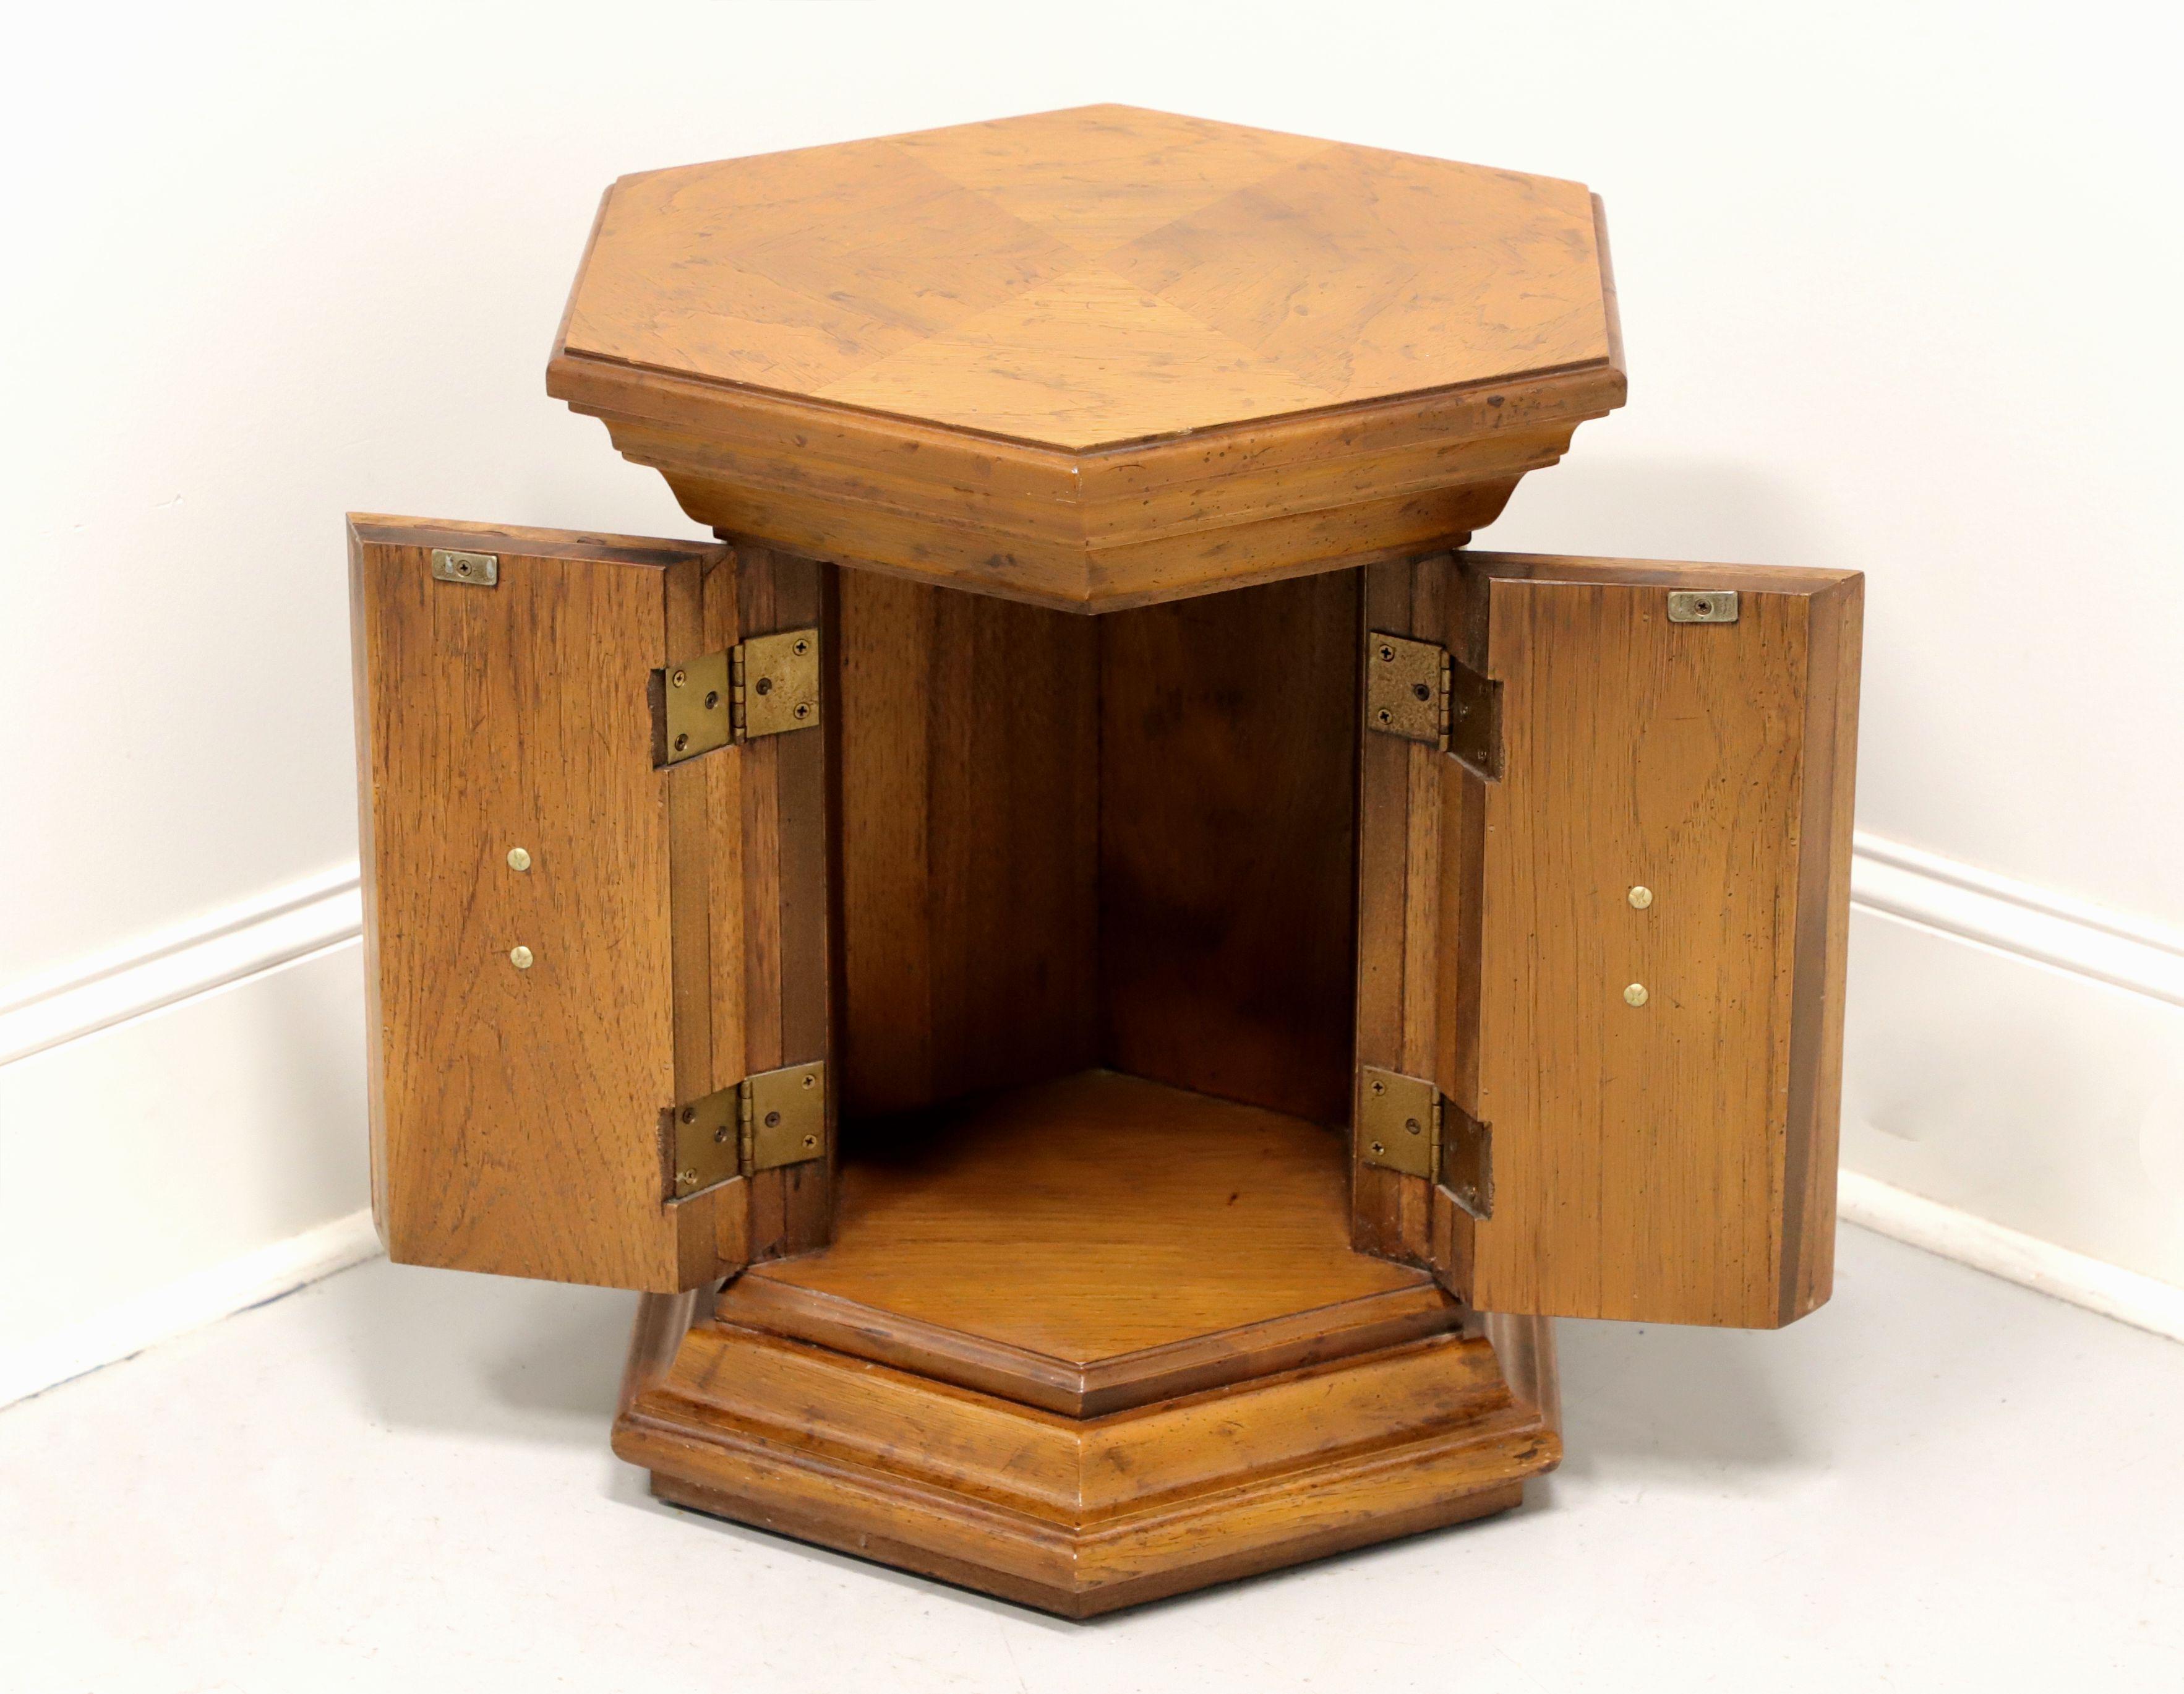 American DREXEL Velero Mid 20th Century Spanish Style Hexagonal Cabinet Accent Table For Sale